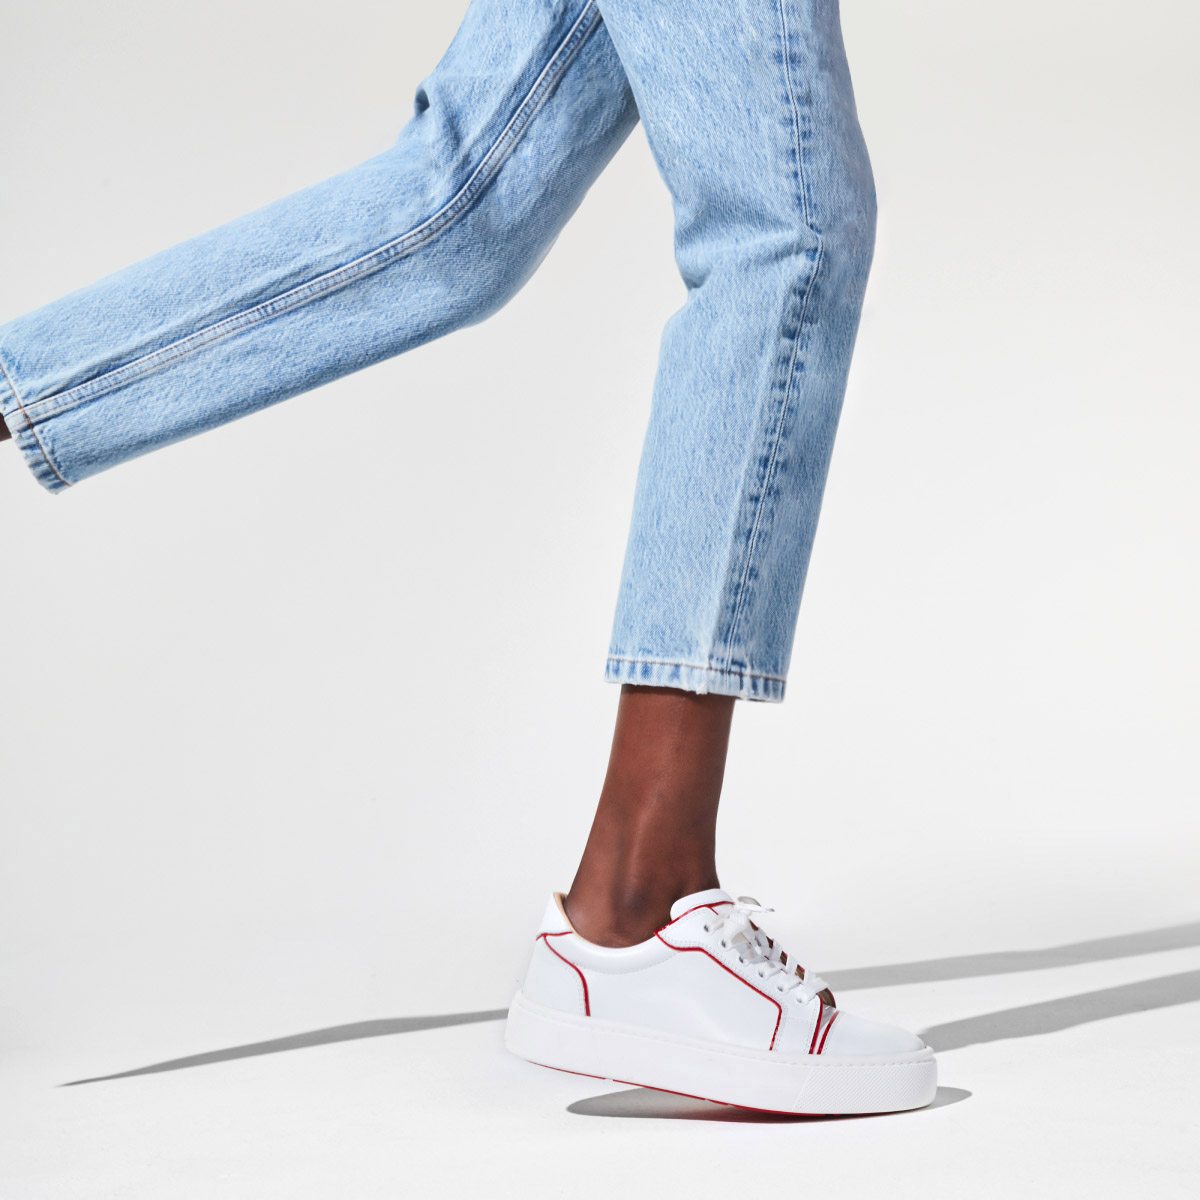 Did somebody say sneakers? - Christian Louboutin Email Archive